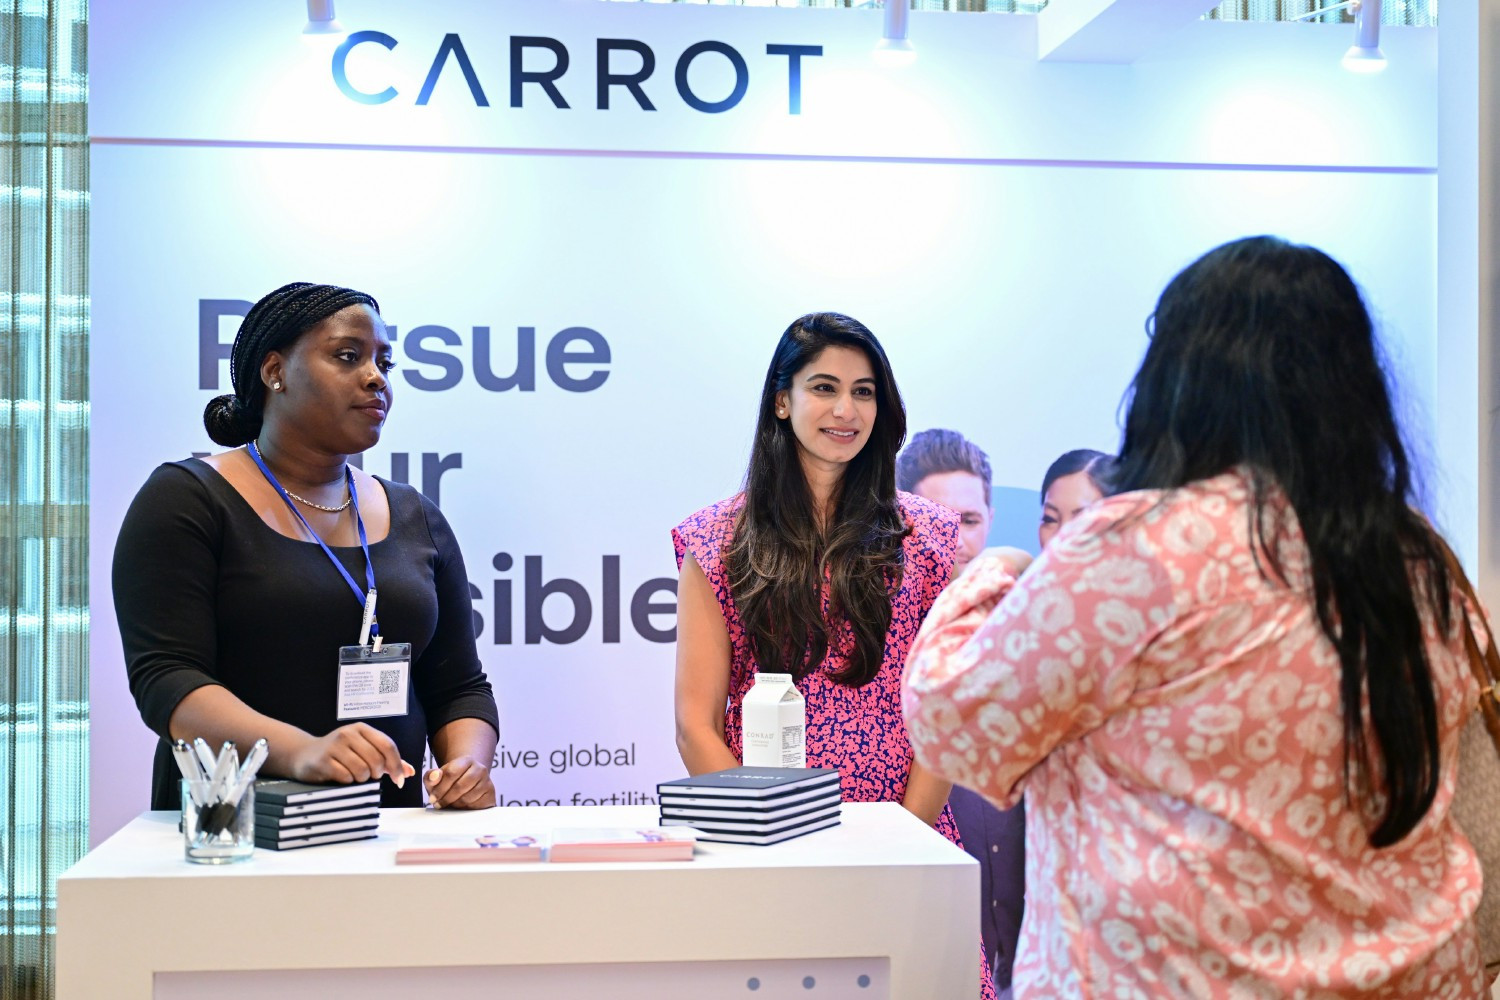 Carrot Co-founder and Chief Medical Officer, Dr. Asima Ahmad